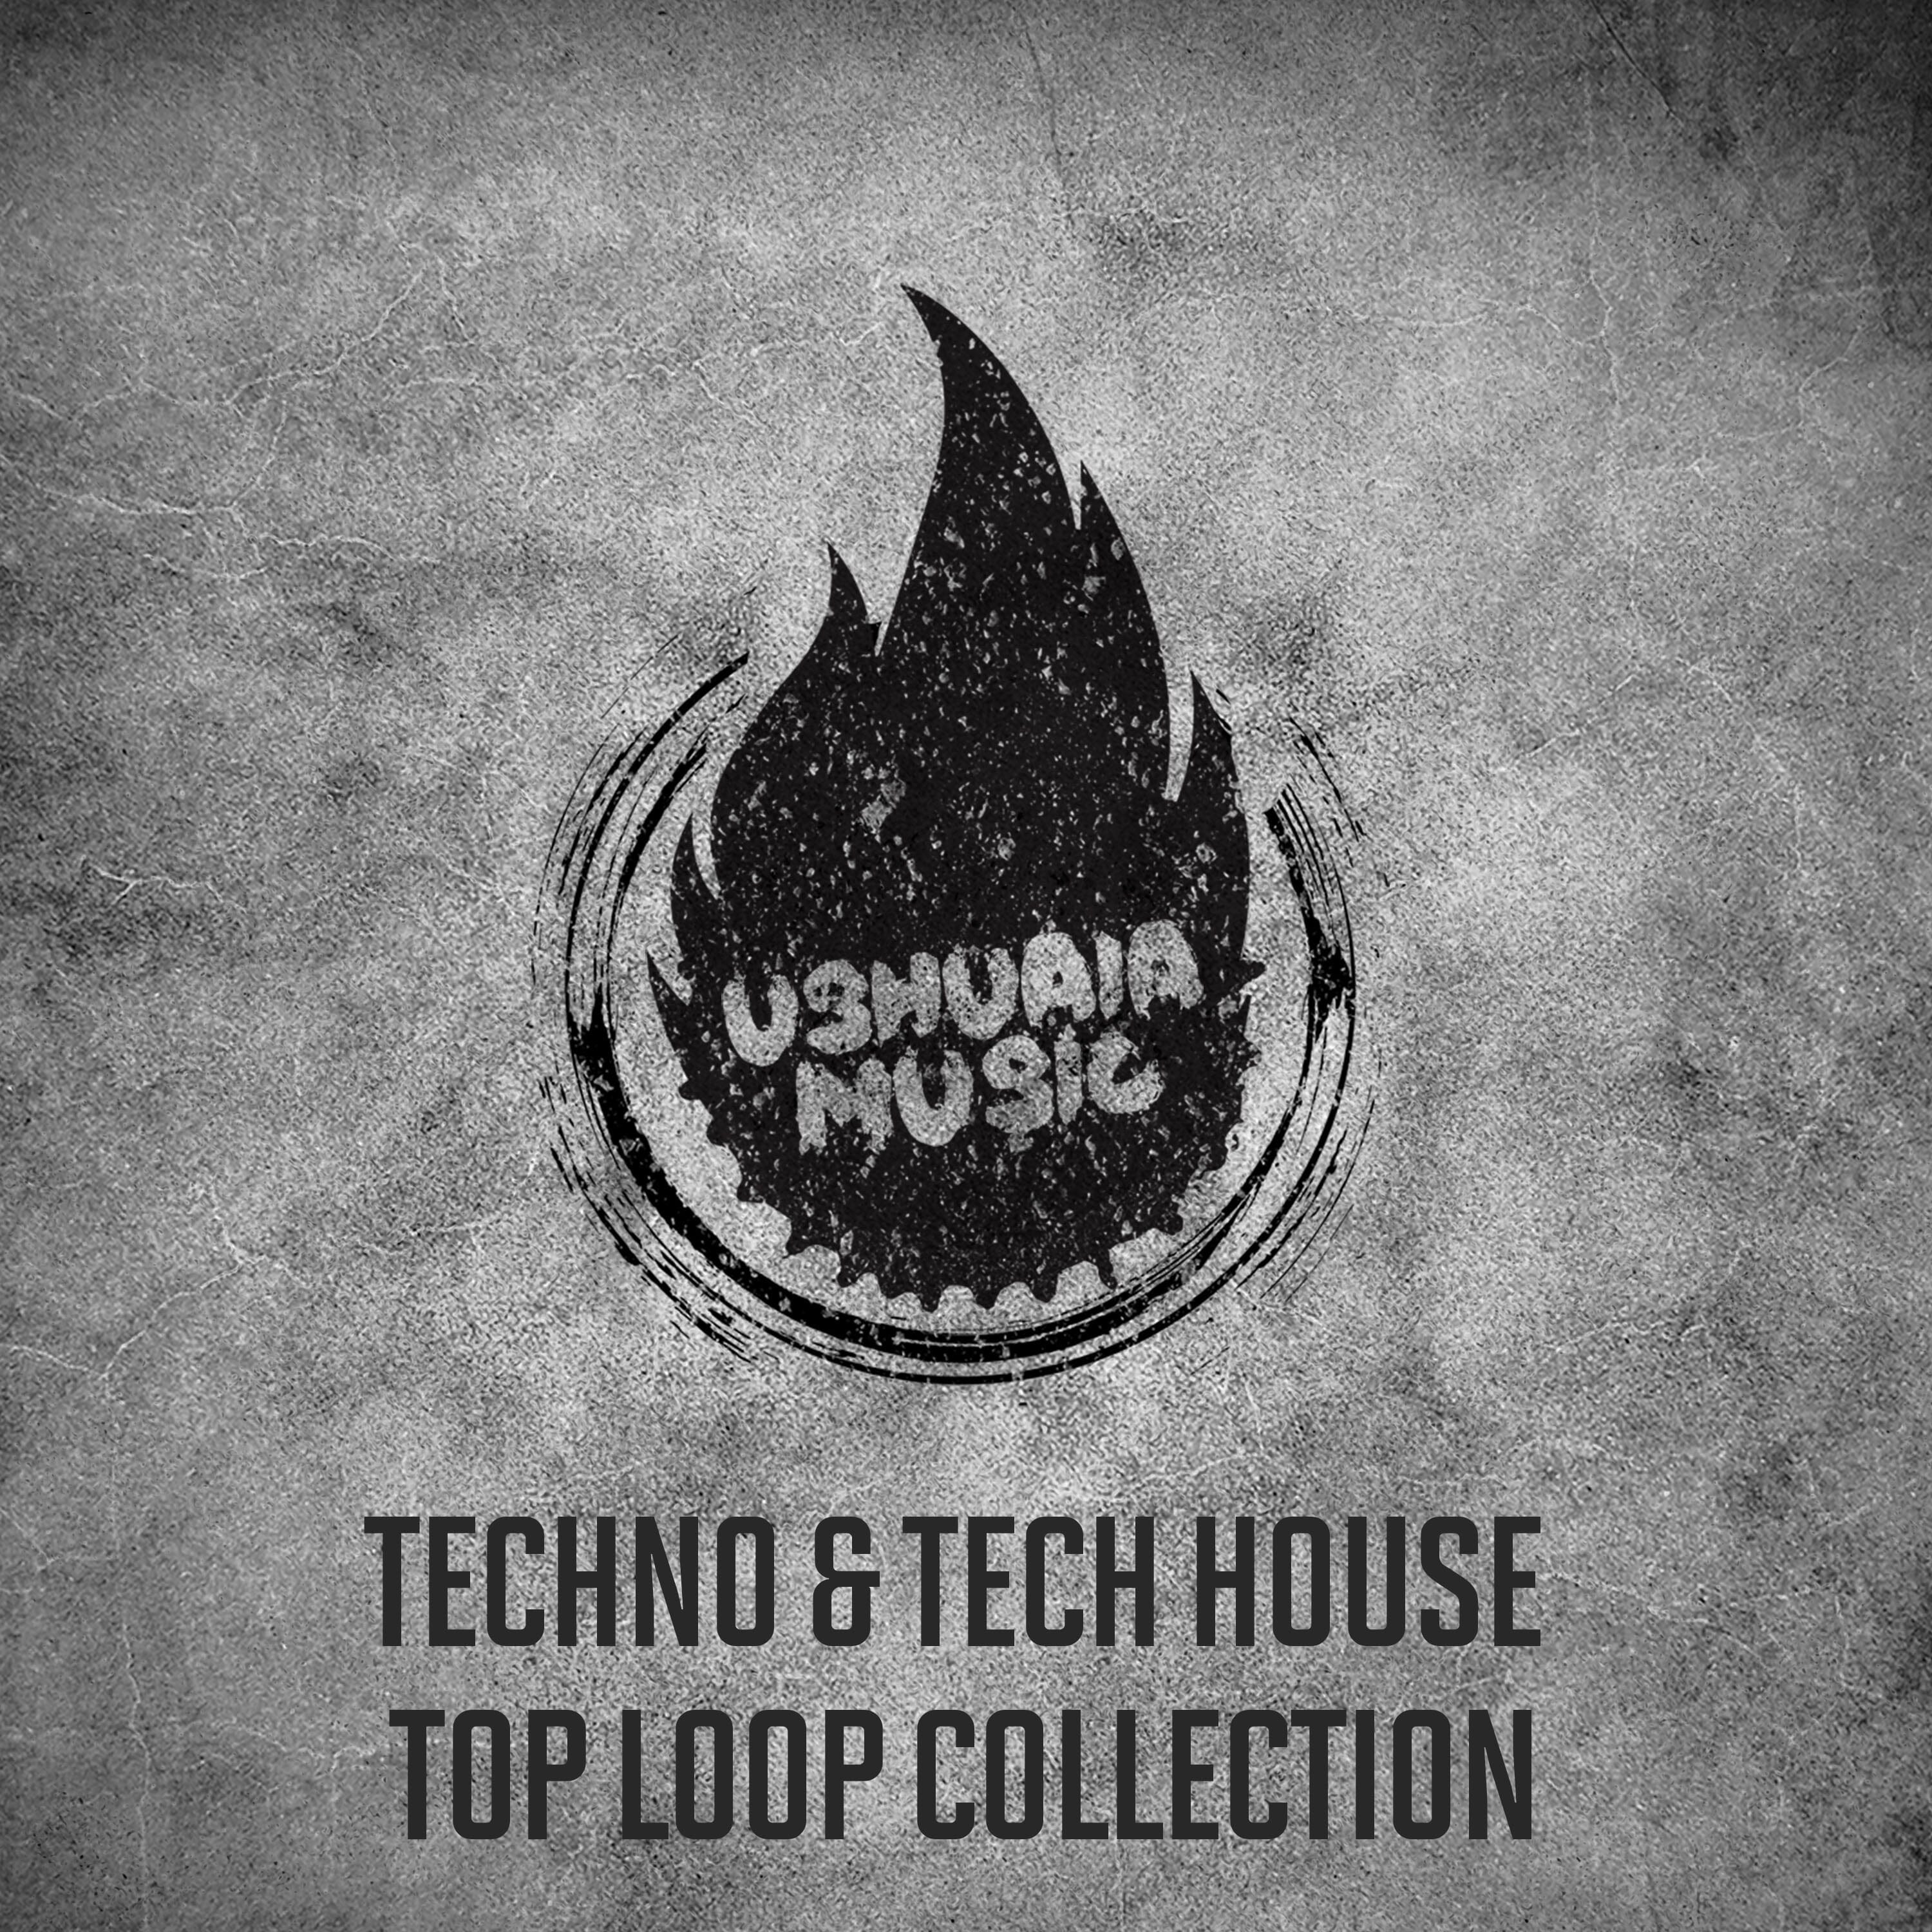 Techno & Tech House Top Loop Collection Sample Pack Ushuaia Music